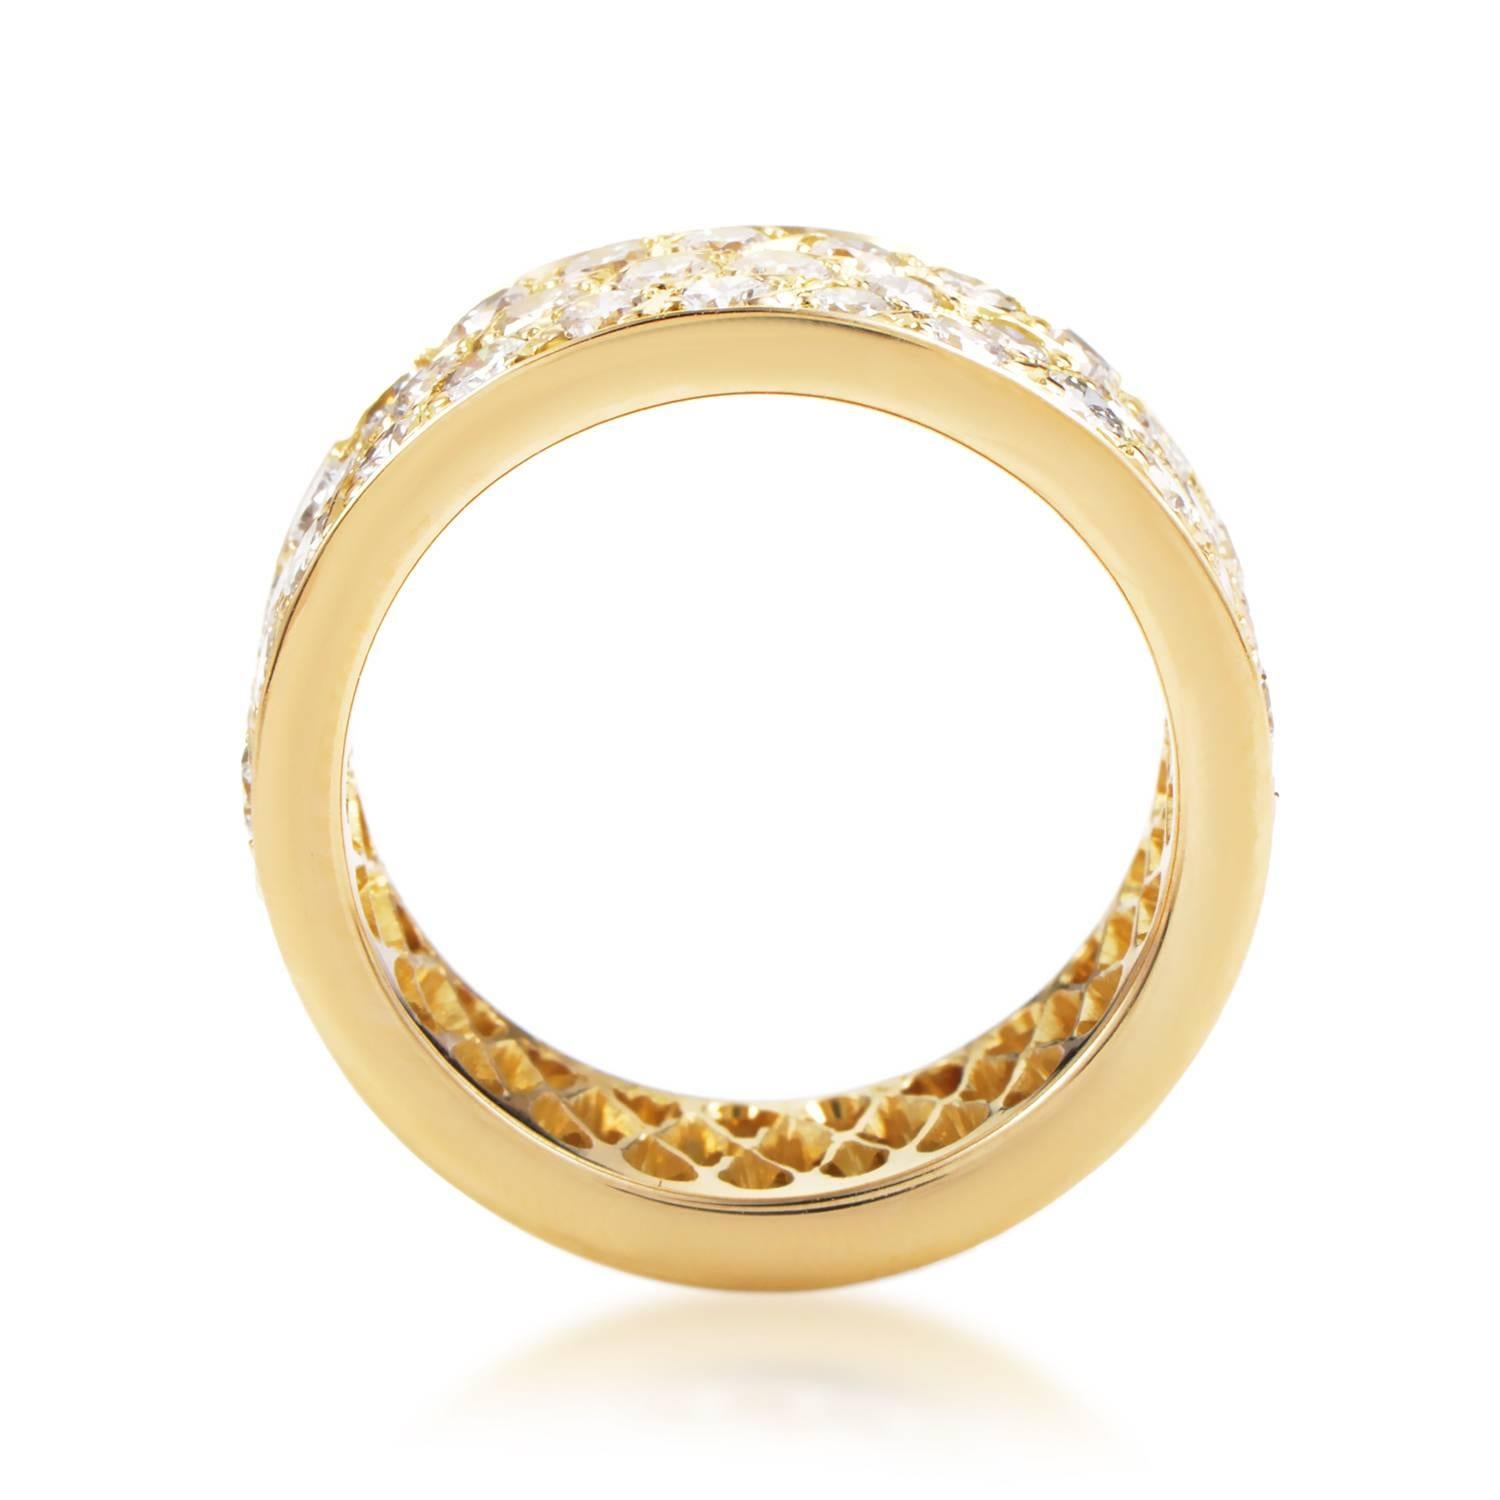 Where sophisticated prestige meets elegant simplicity, this magnificent wedding band from Van Cleef & Arpels boasts a neat 18K yellow gold body adorned with a brilliant arrangement of glistening diamonds weighing in total 2.93 carats.
Included